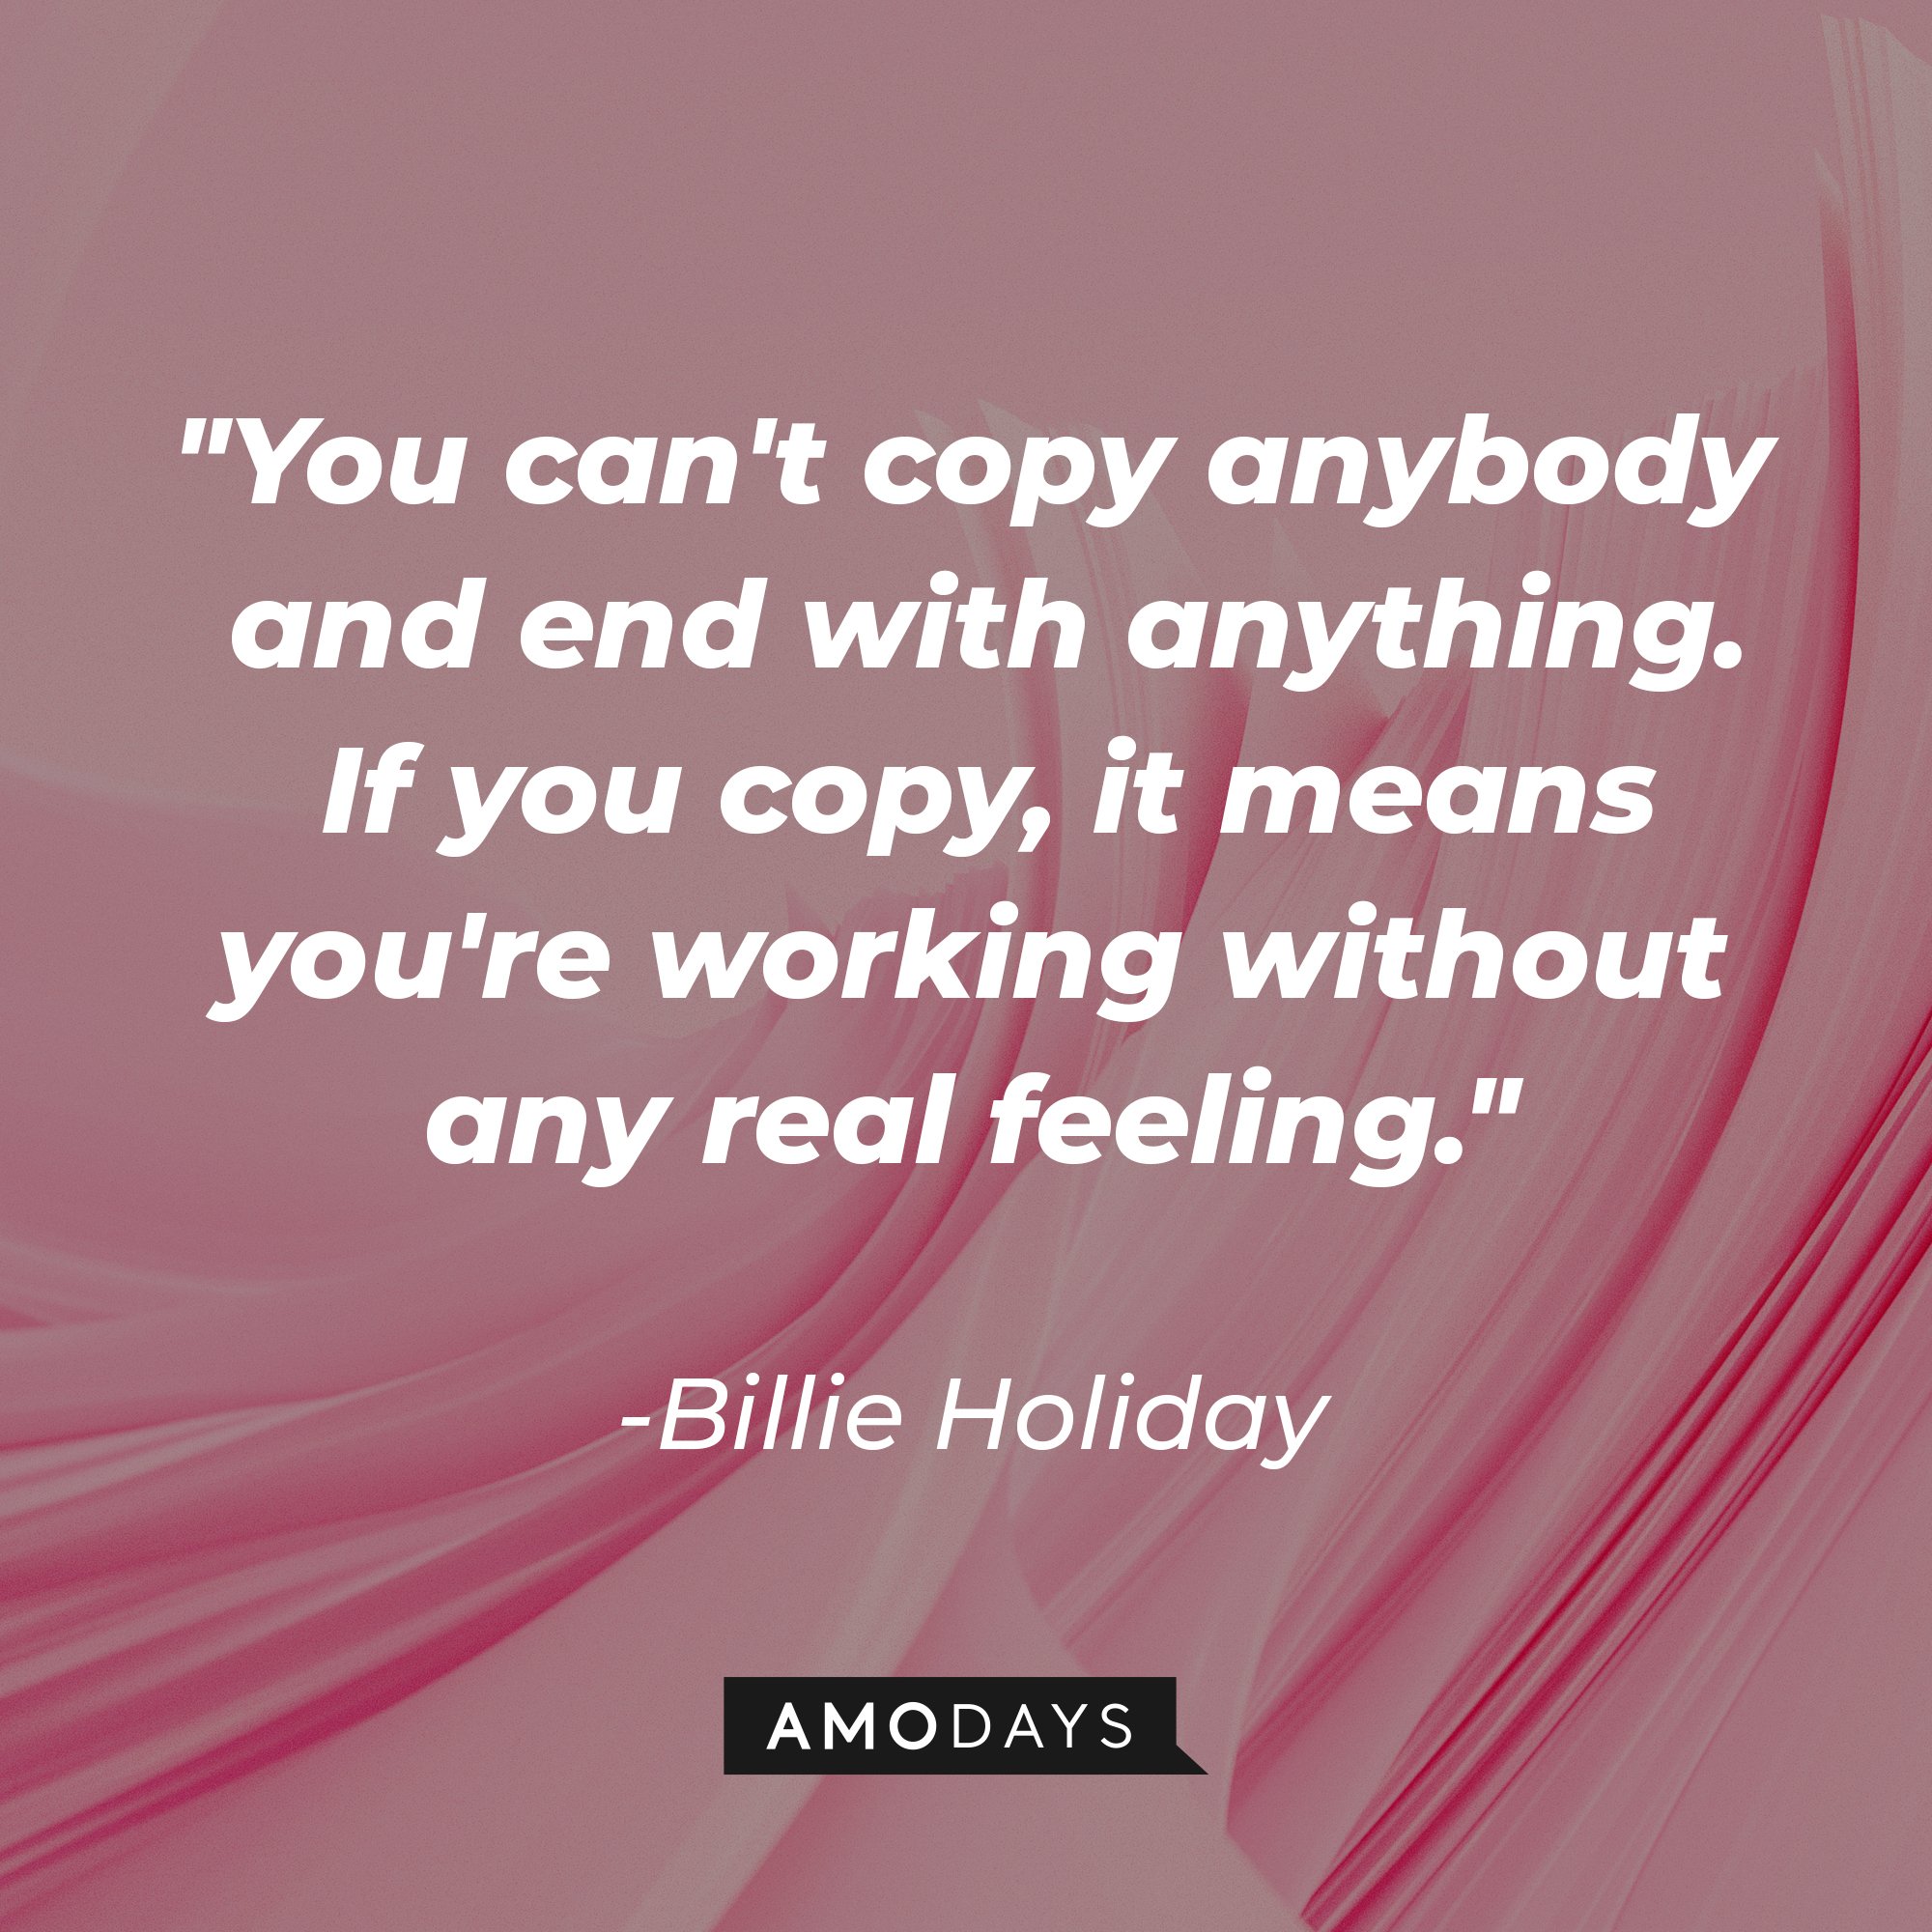 Billie Holiday's quote "You can't copy anybody and end with anything. If you copy, it means you're working without any real feeling." | Source: Unsplash.com